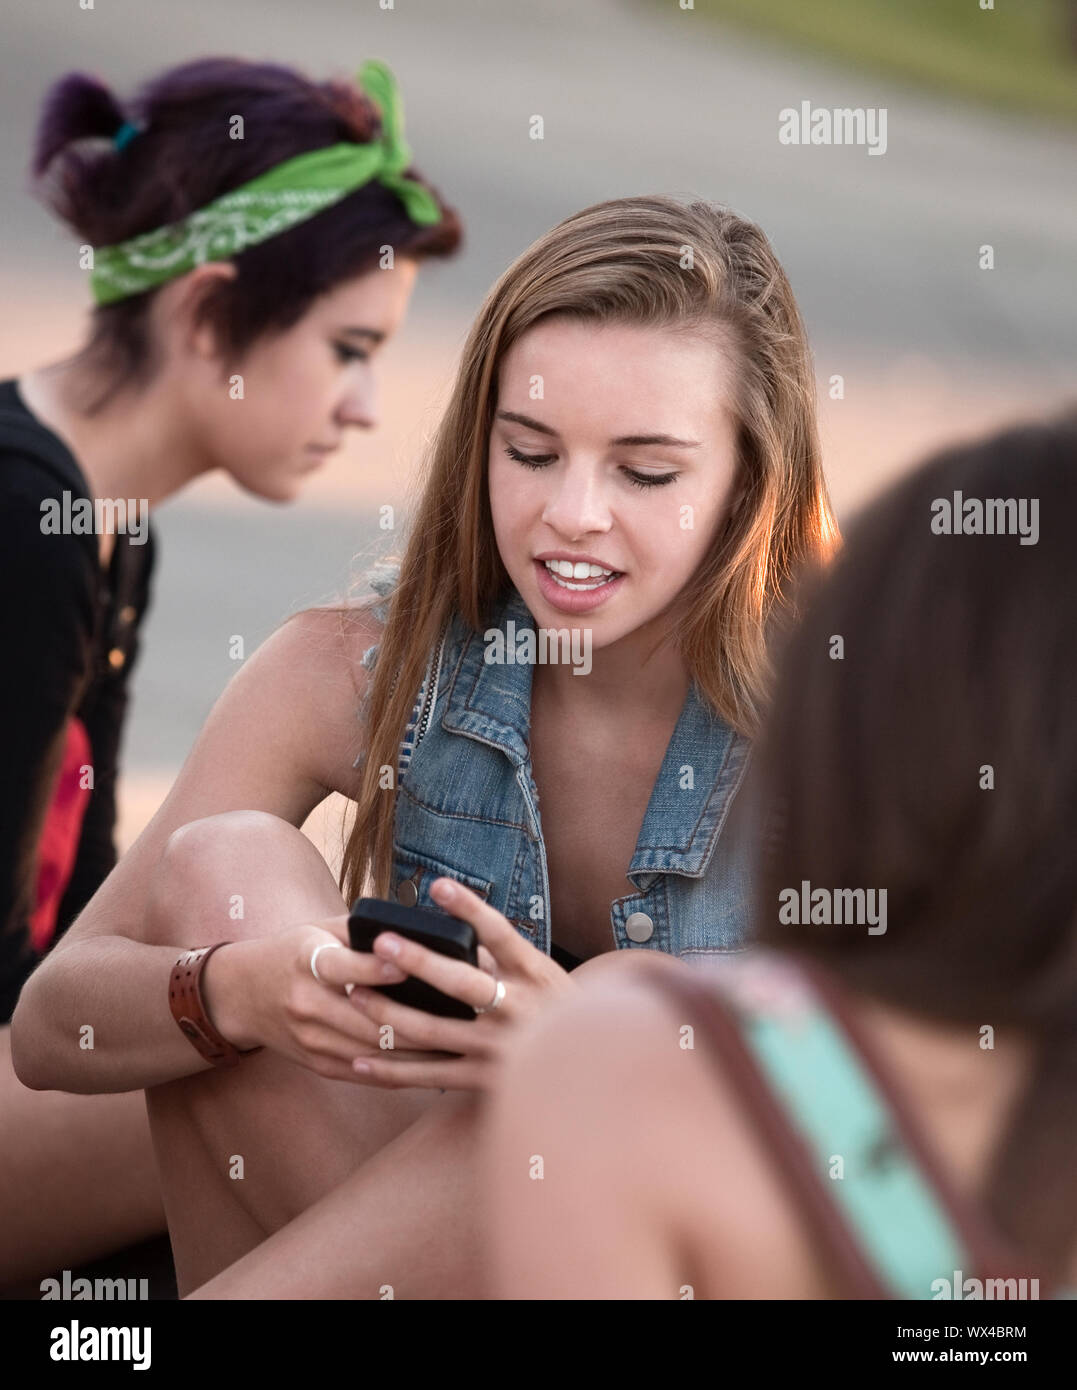 Girls teens blonde. Young Generation using Phones. How to talk to girls at Parties.